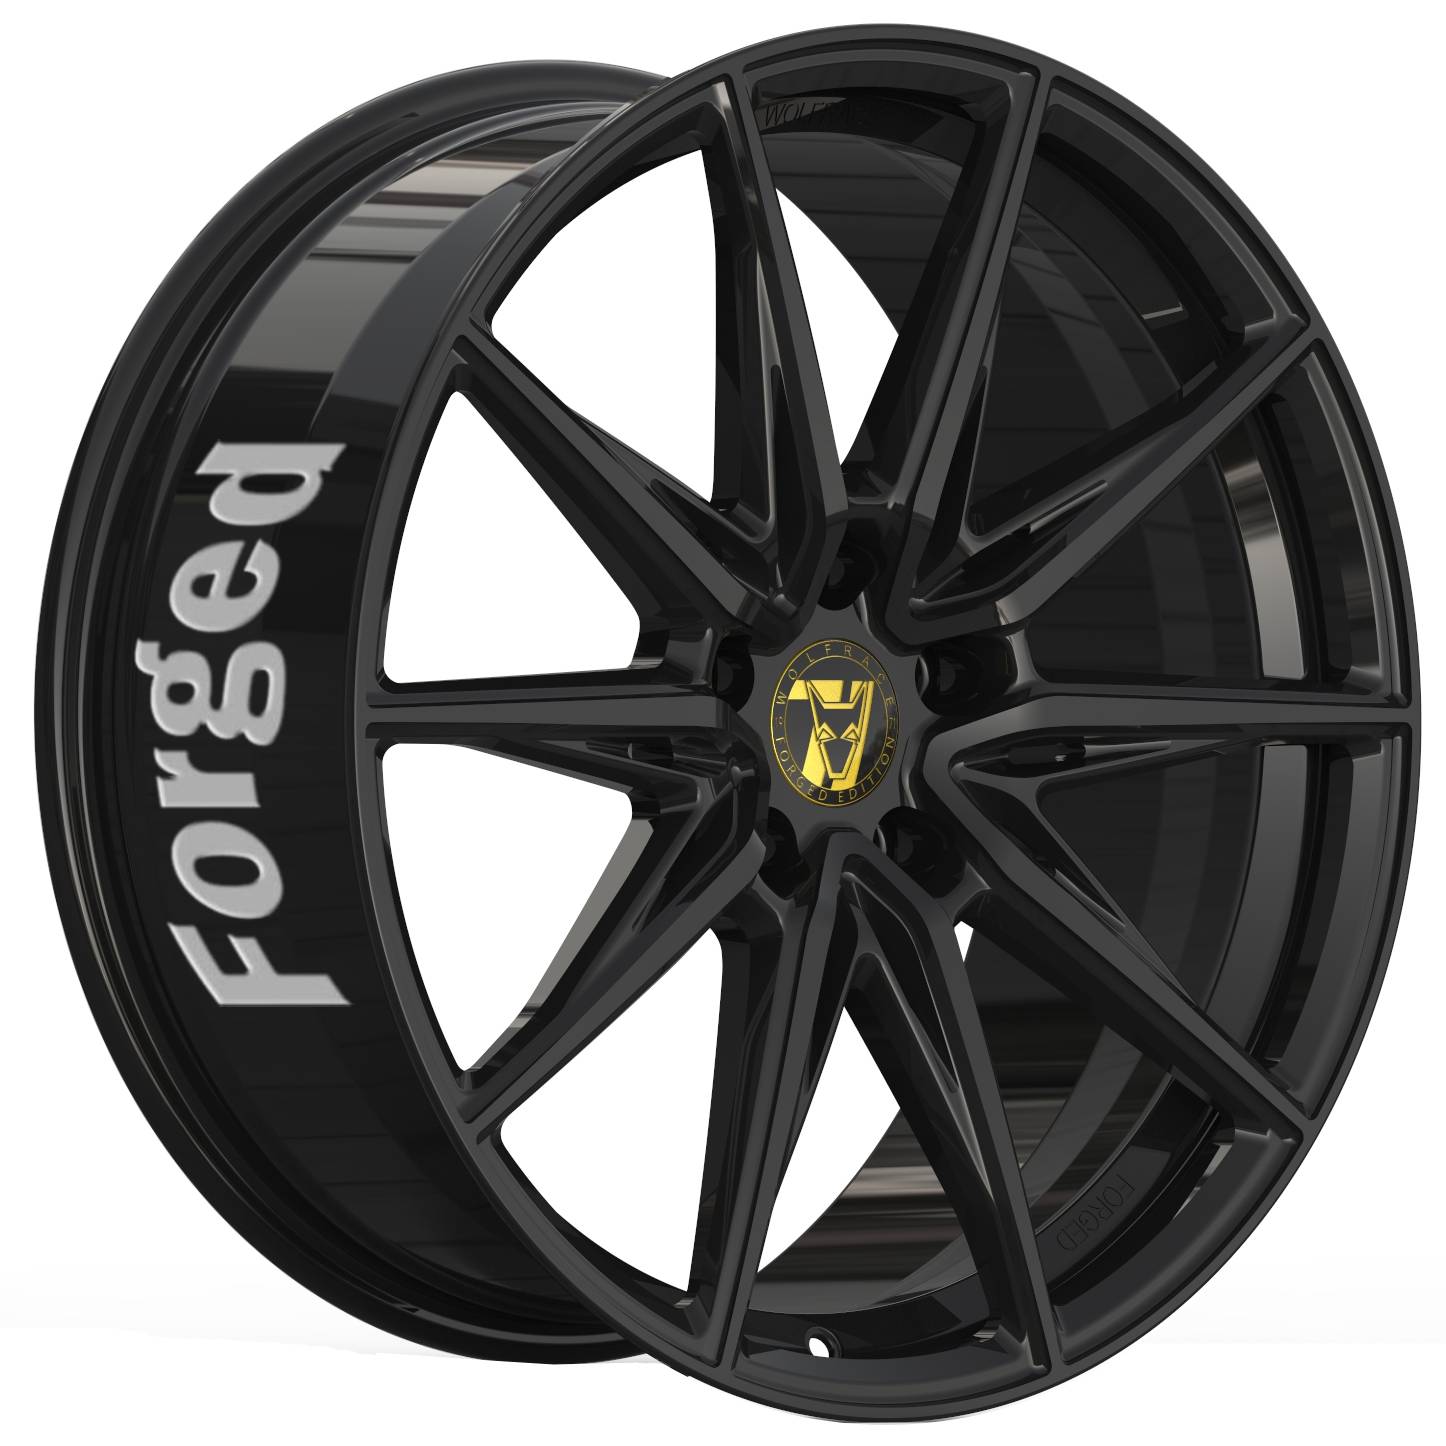 Demon Wheels 71 Forged Edition Urban Racer Forged [12x23] -5x115- ET 45